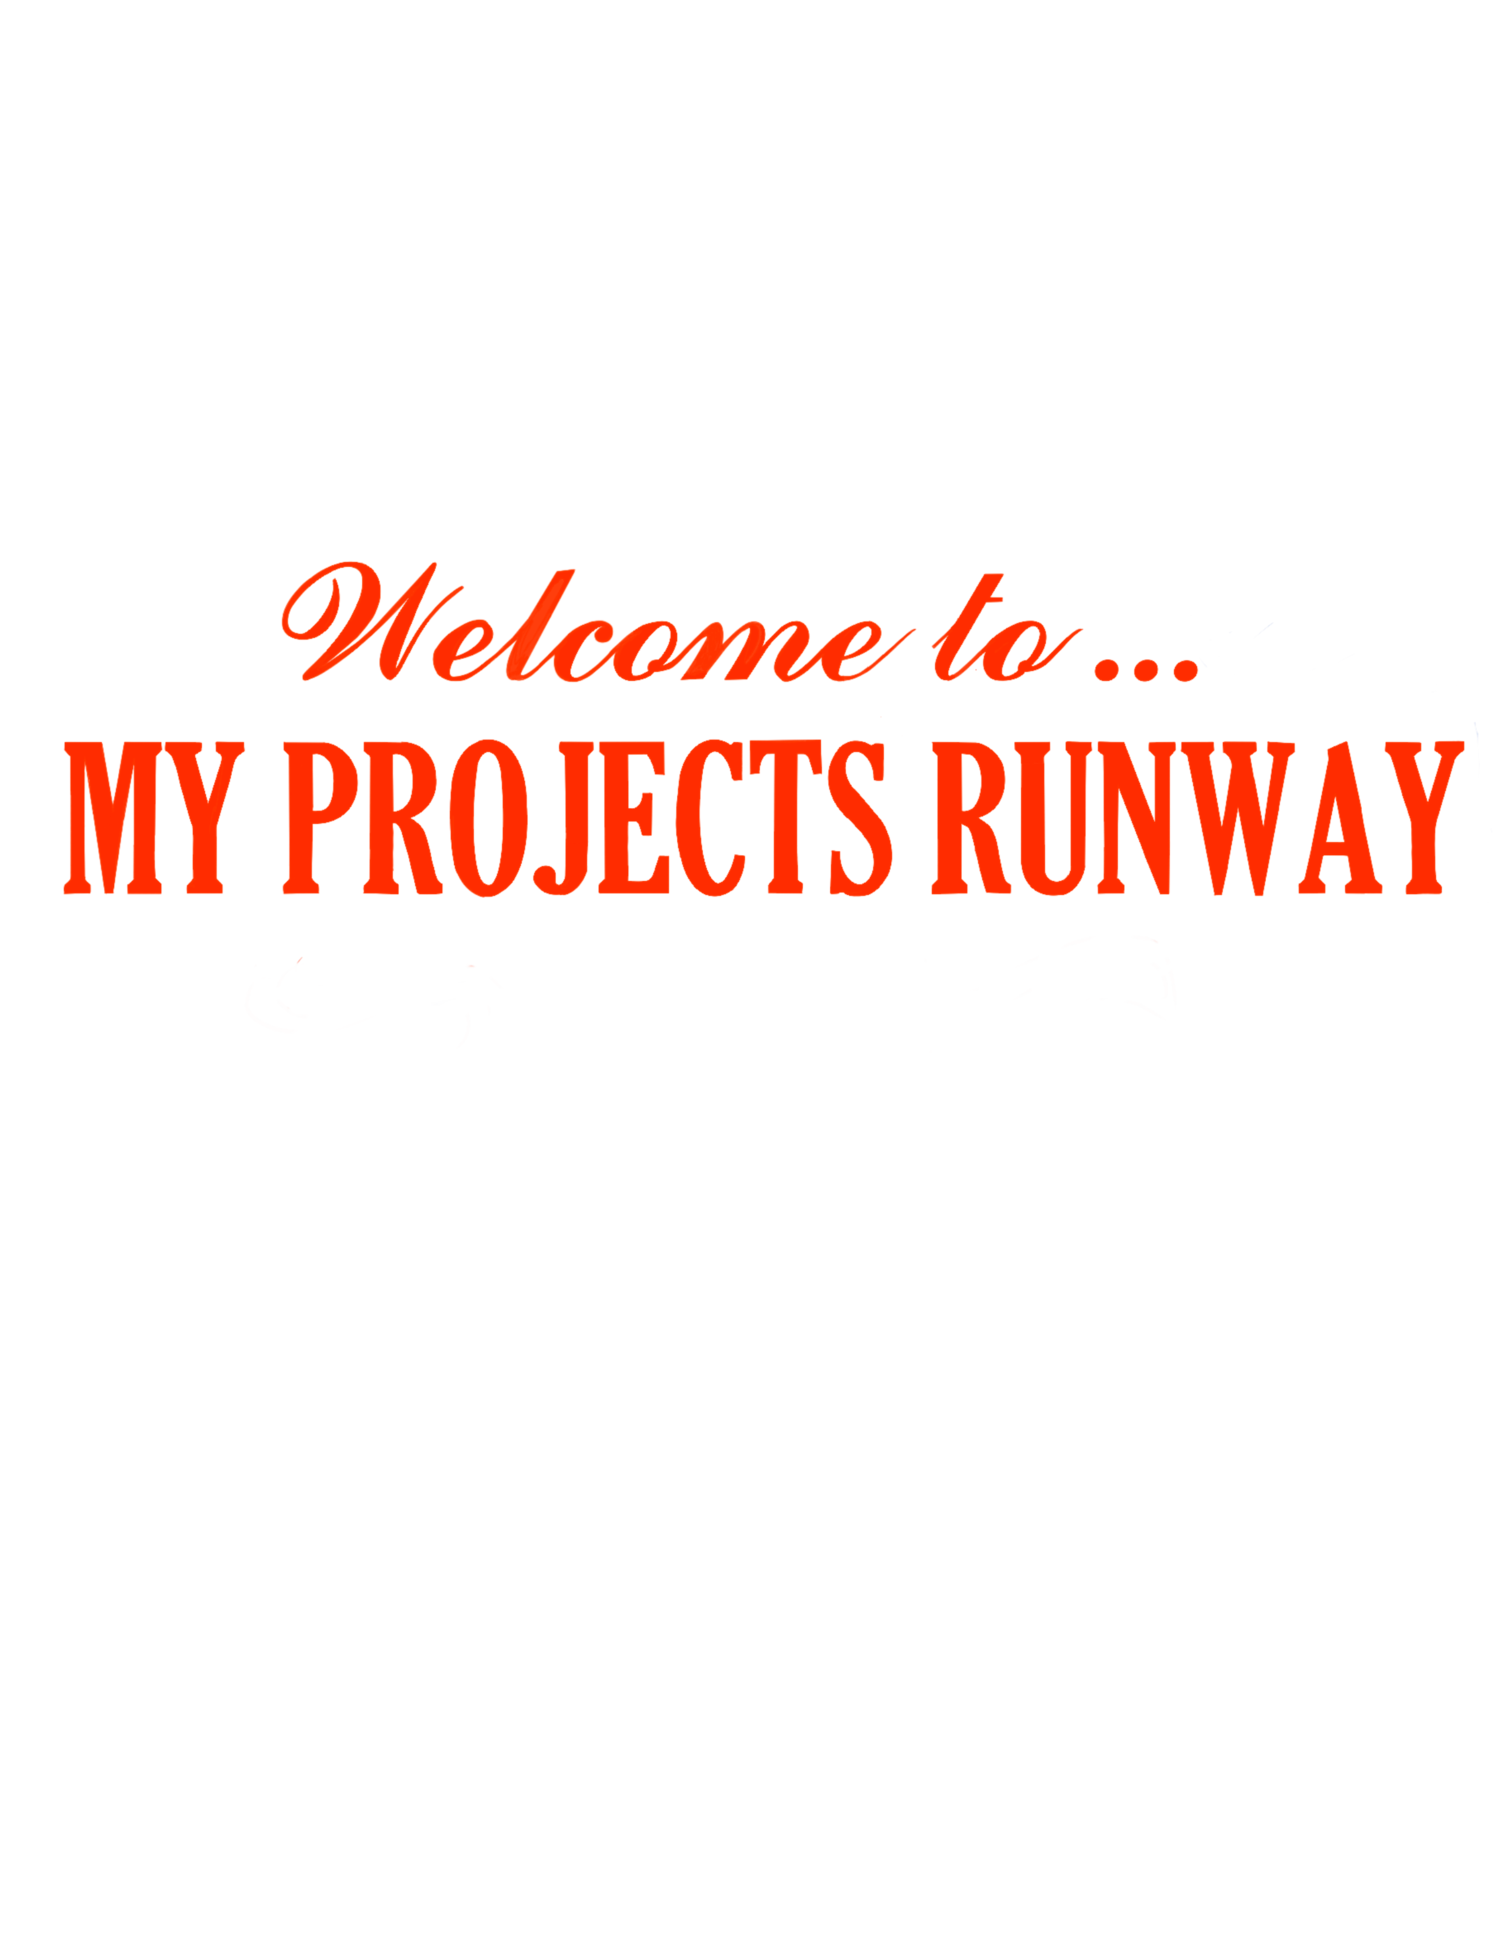 My Projects Runway